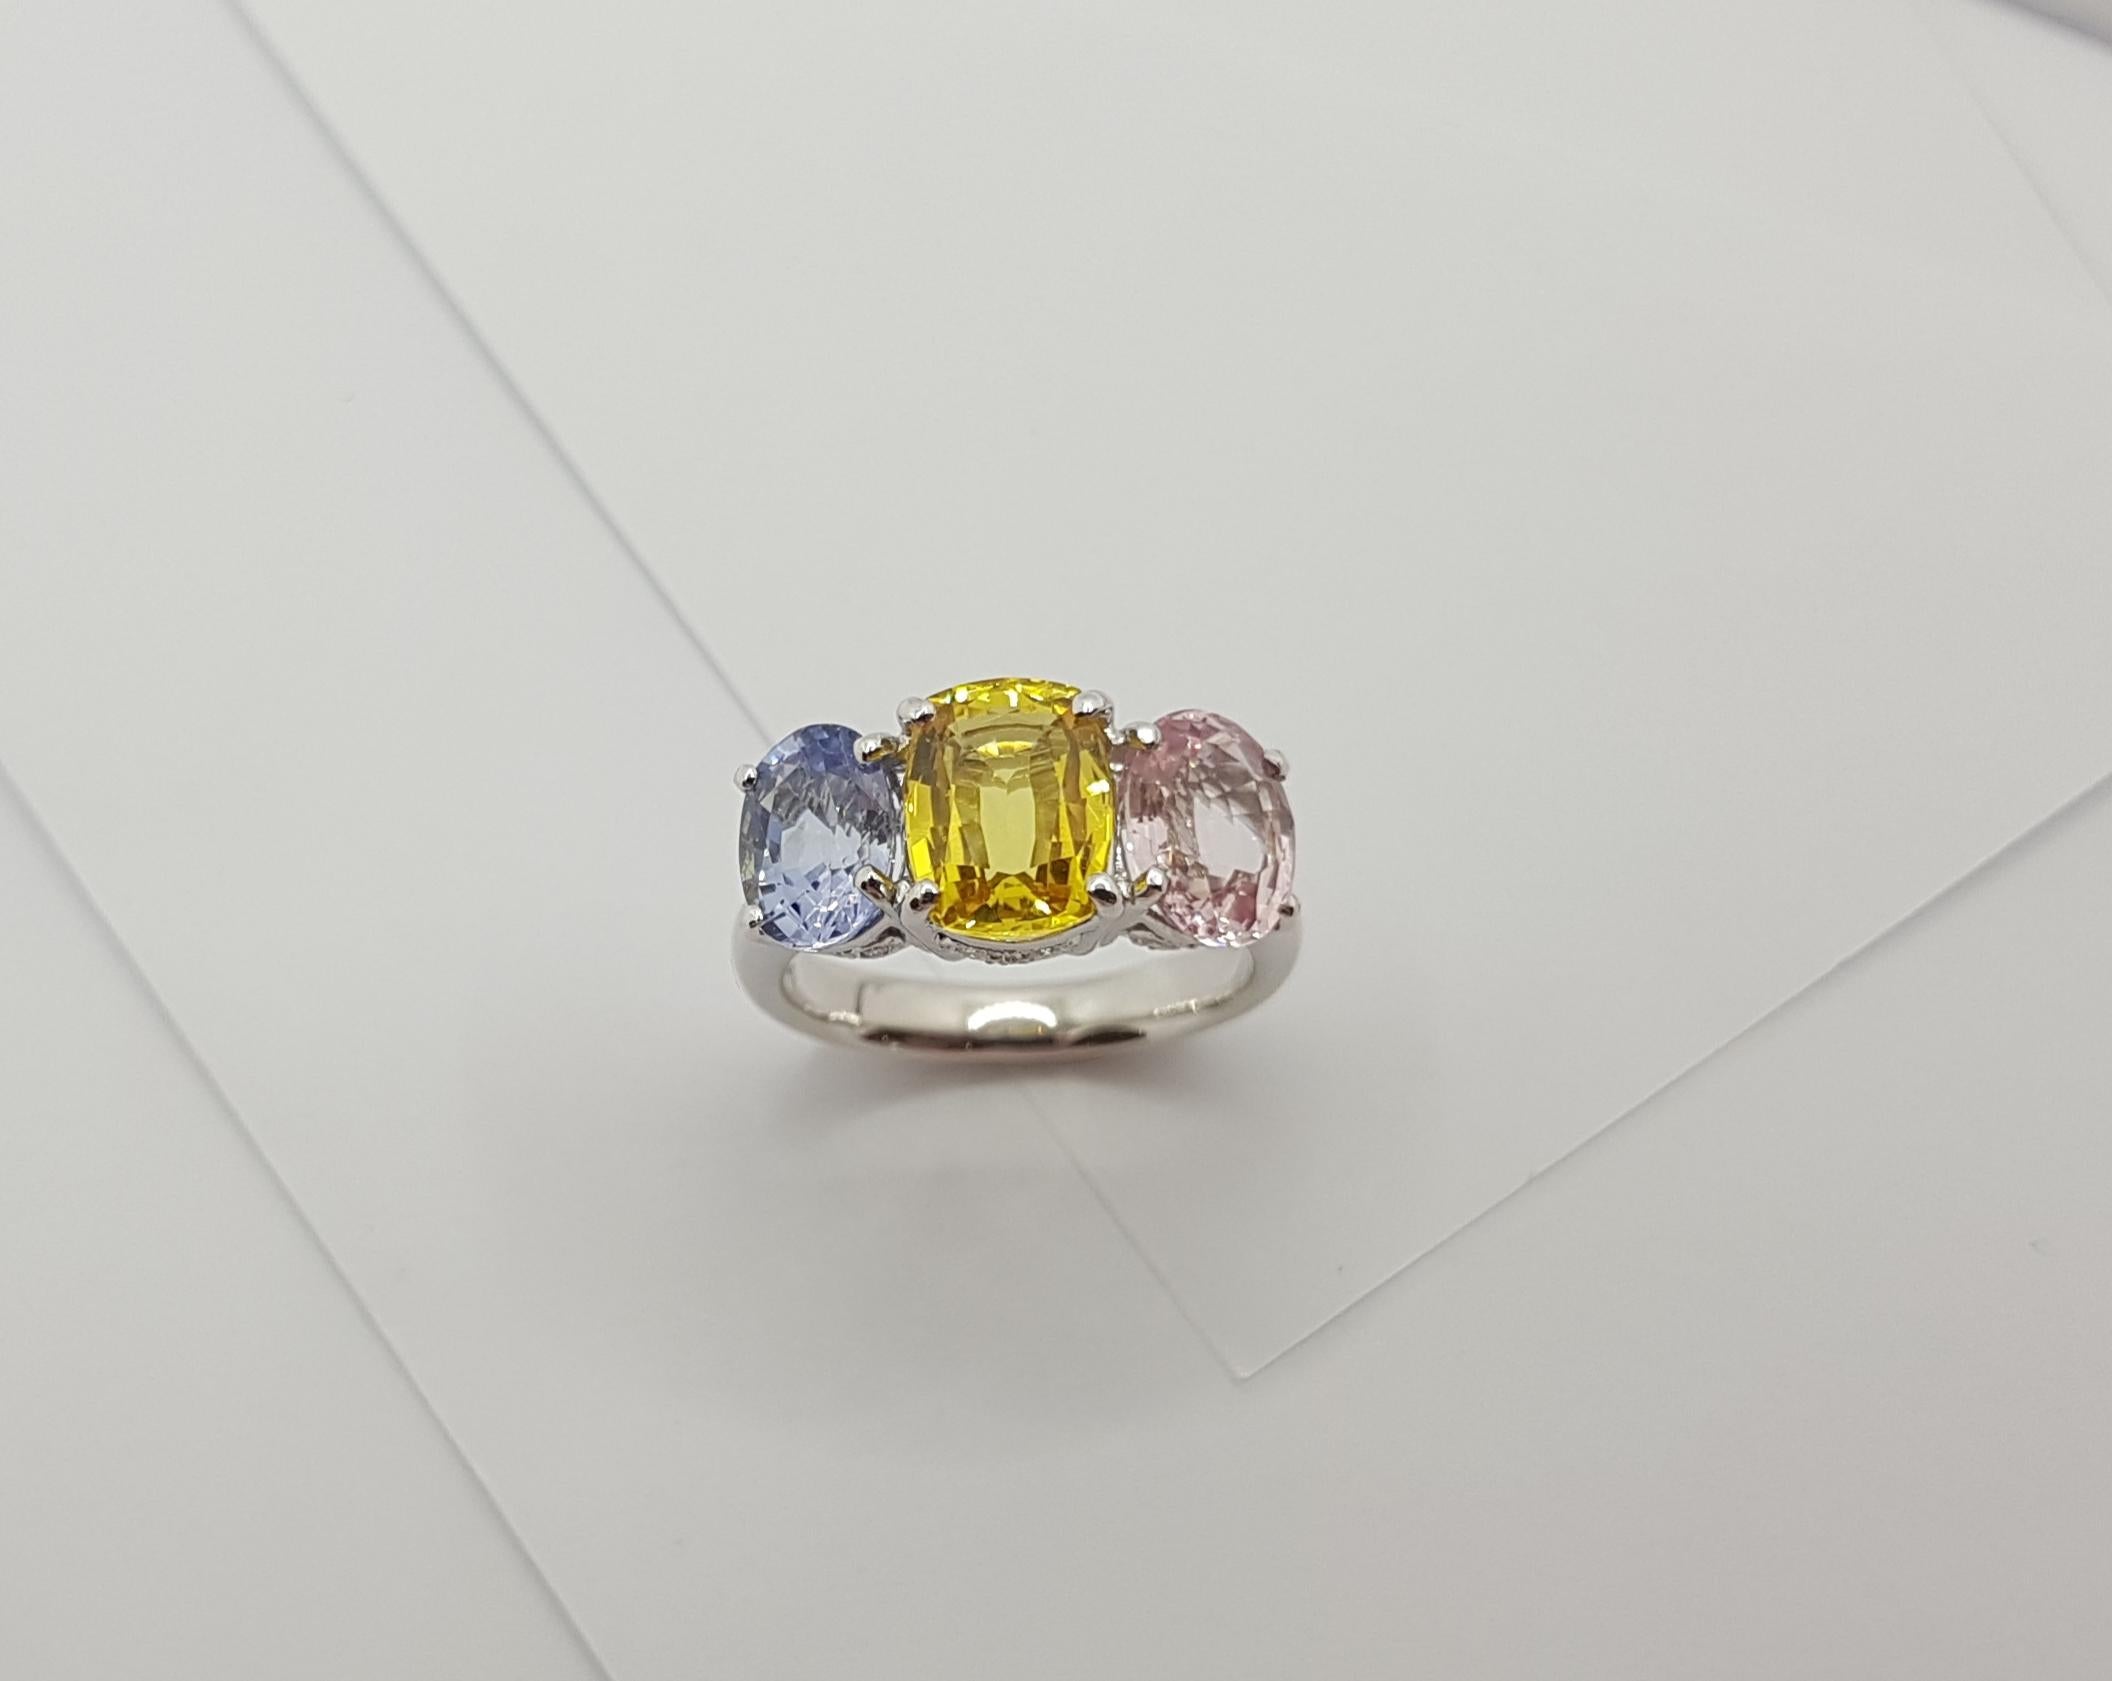 Women's Pink Sapphire, Yellow Sapphire, Blue Sapphire Ring Set in 14 Karat White Gold For Sale